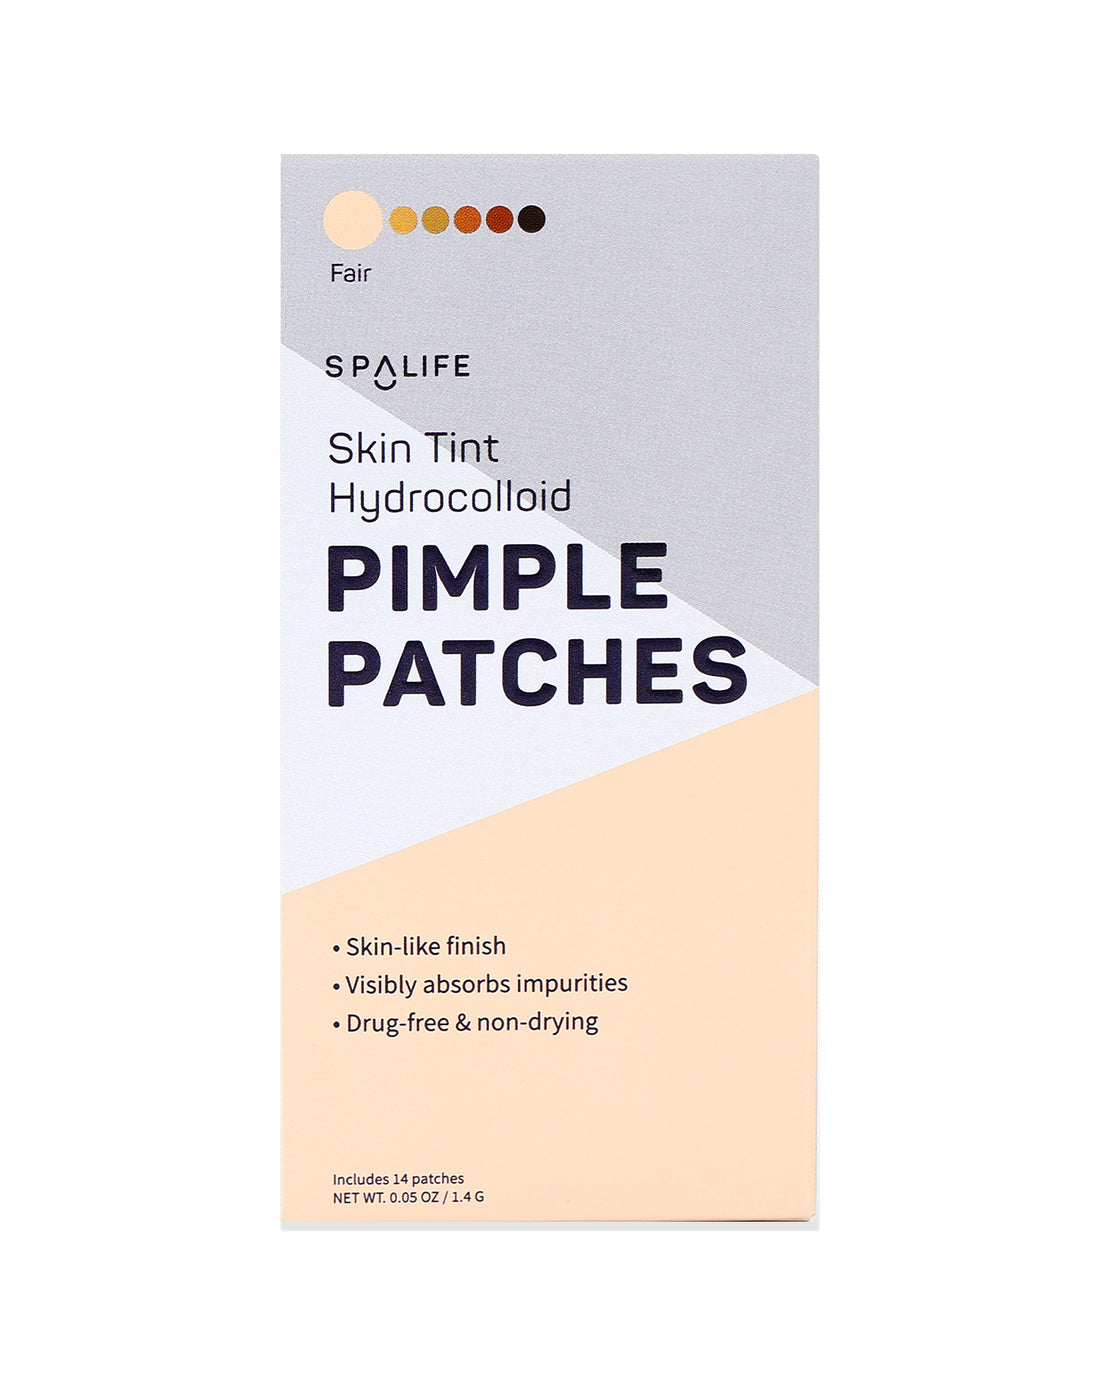 Skin_tint_pimple_patches_packe-540